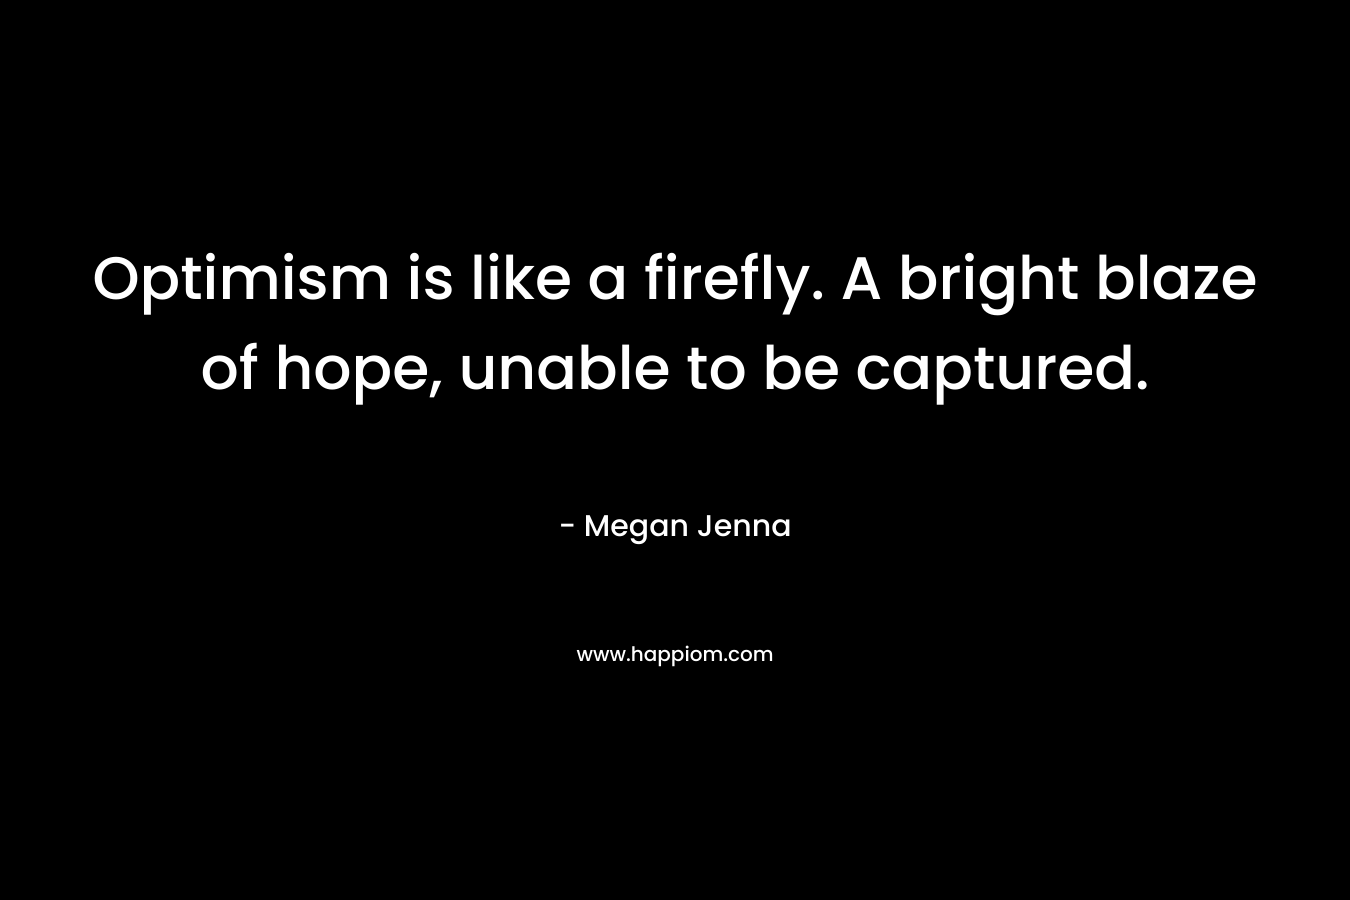 Optimism is like a firefly. A bright blaze of hope, unable to be captured. – Megan Jenna